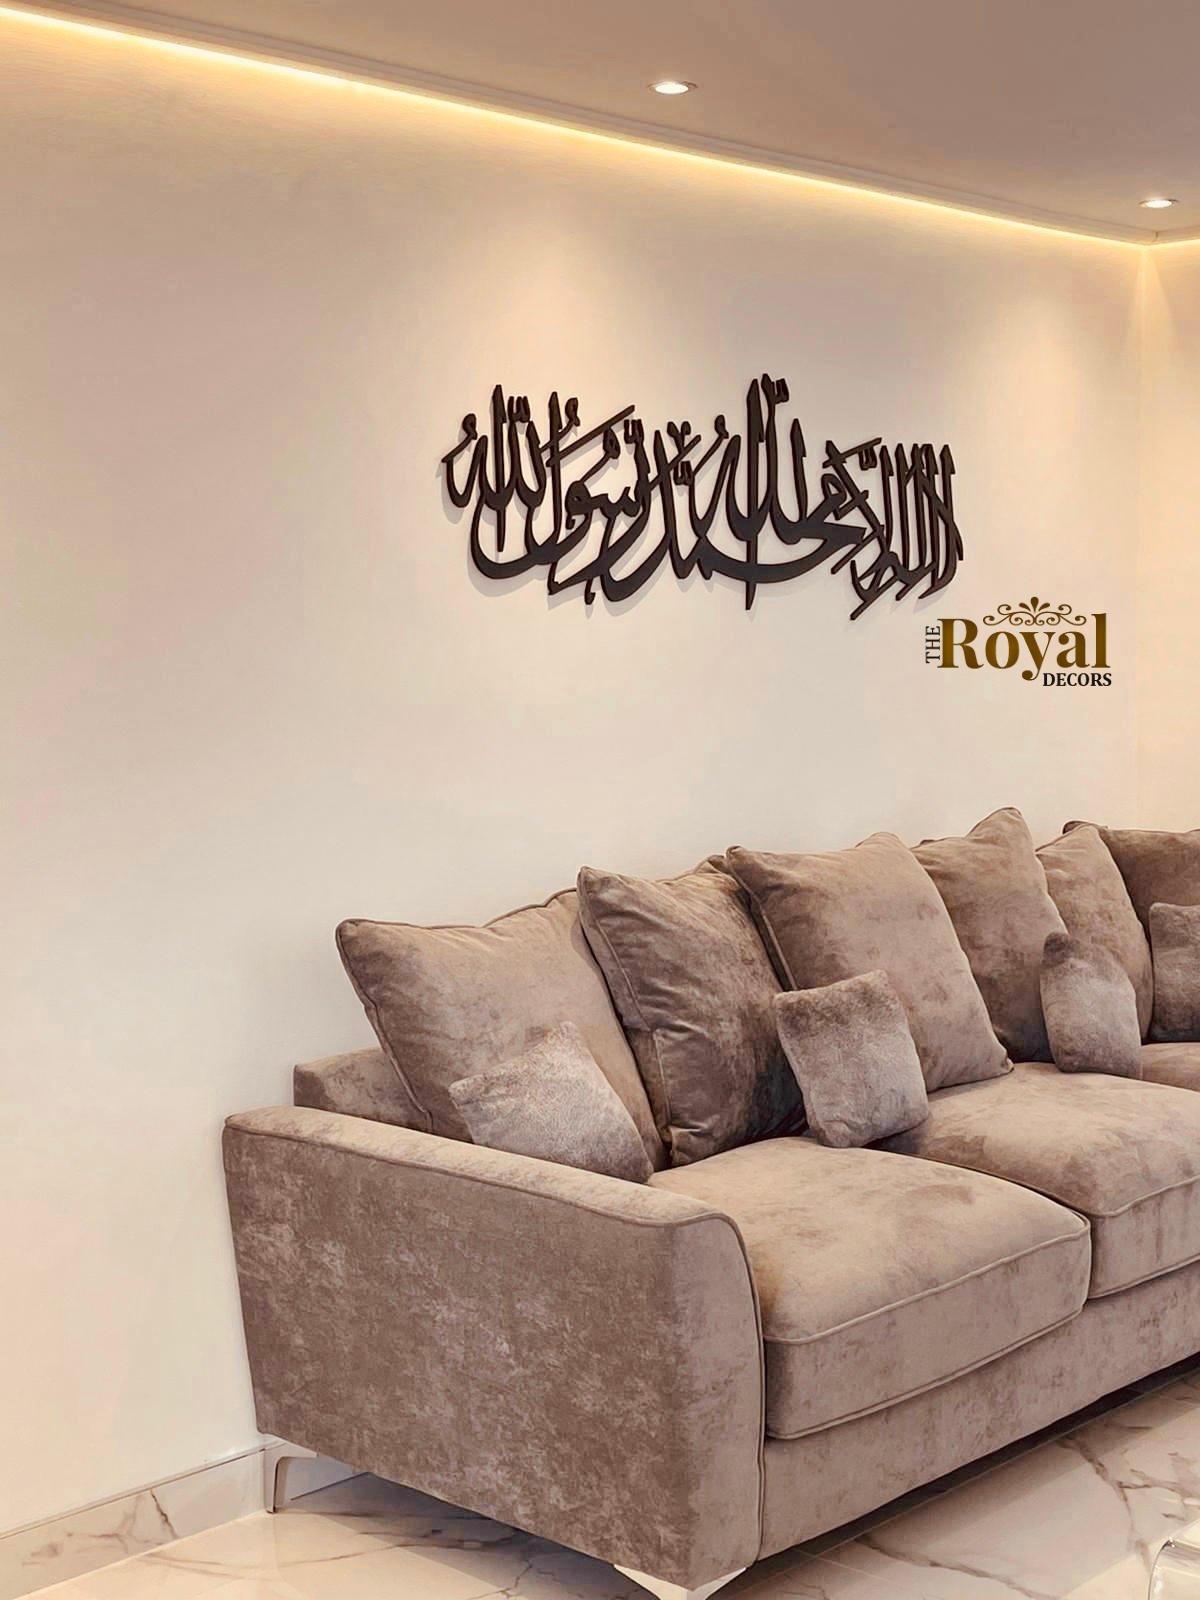 Extra large 3D thick deep wooden Modern and unique handmade Kalima Shahada arabic calligraphy islamic wall art home decor in gold silver black brown grey white rosegold